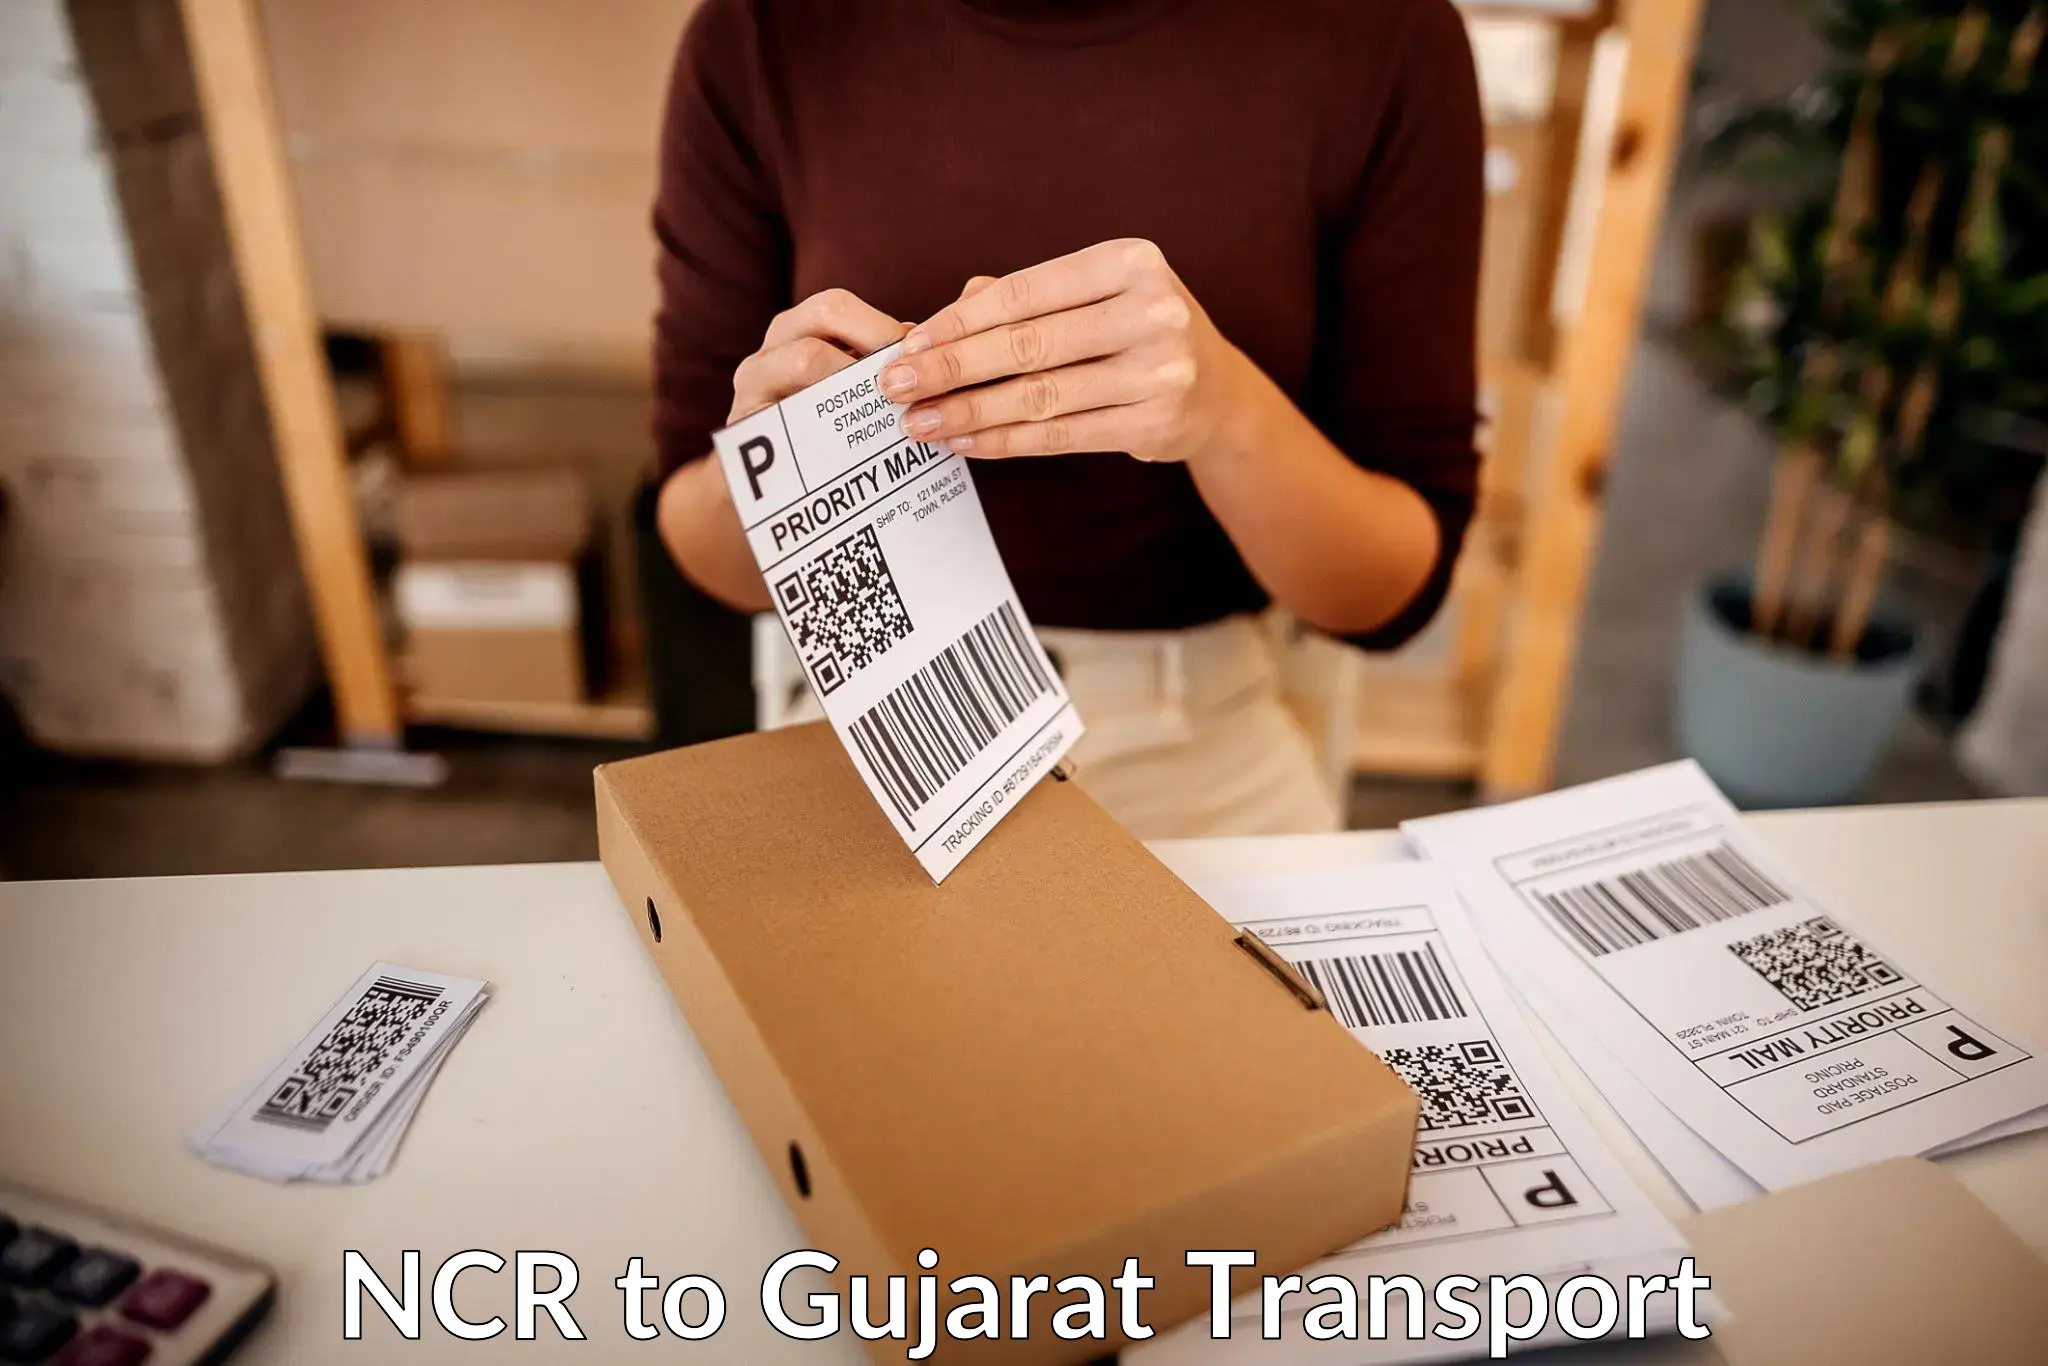 Road transport online services NCR to Bhuj